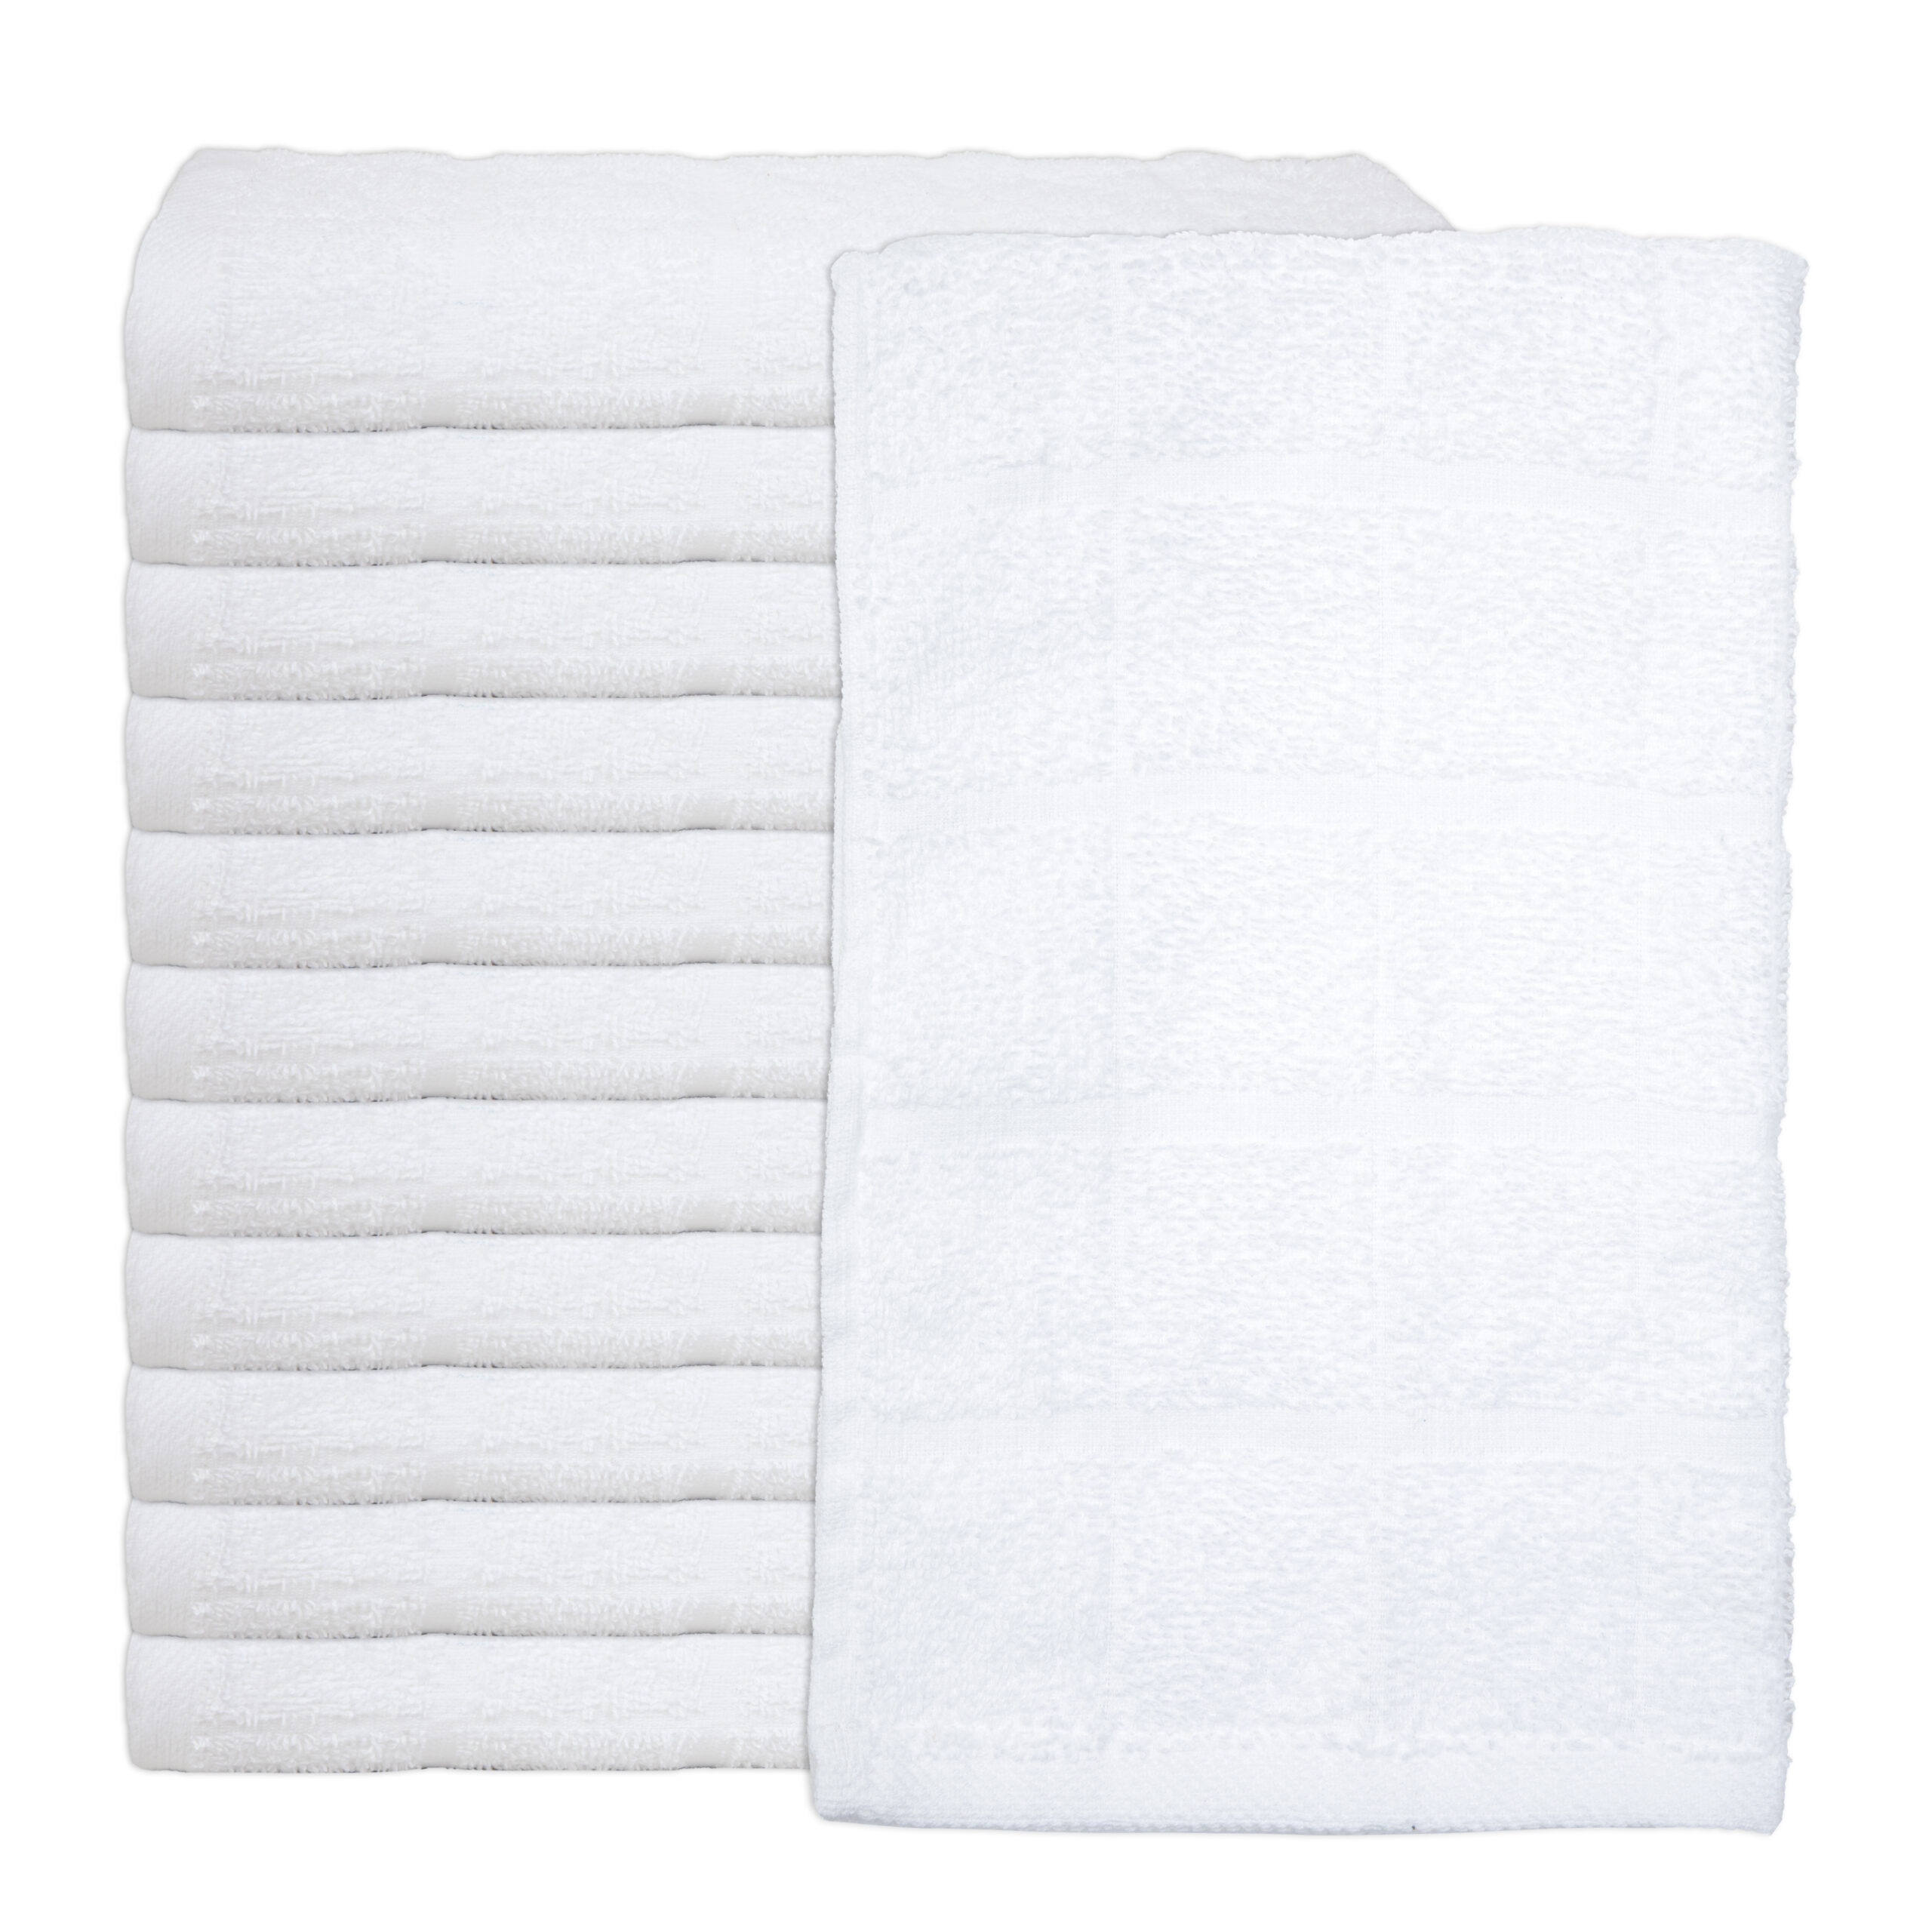 Buy Wholesale Kitchen Towels Solid Color / Wholesale Terry Cloth Printed Kitchen  Towel / Wholesale White Linen Kitchen Towels from Hebei Tianqi Import And  Export Trade Co., Ltd., China